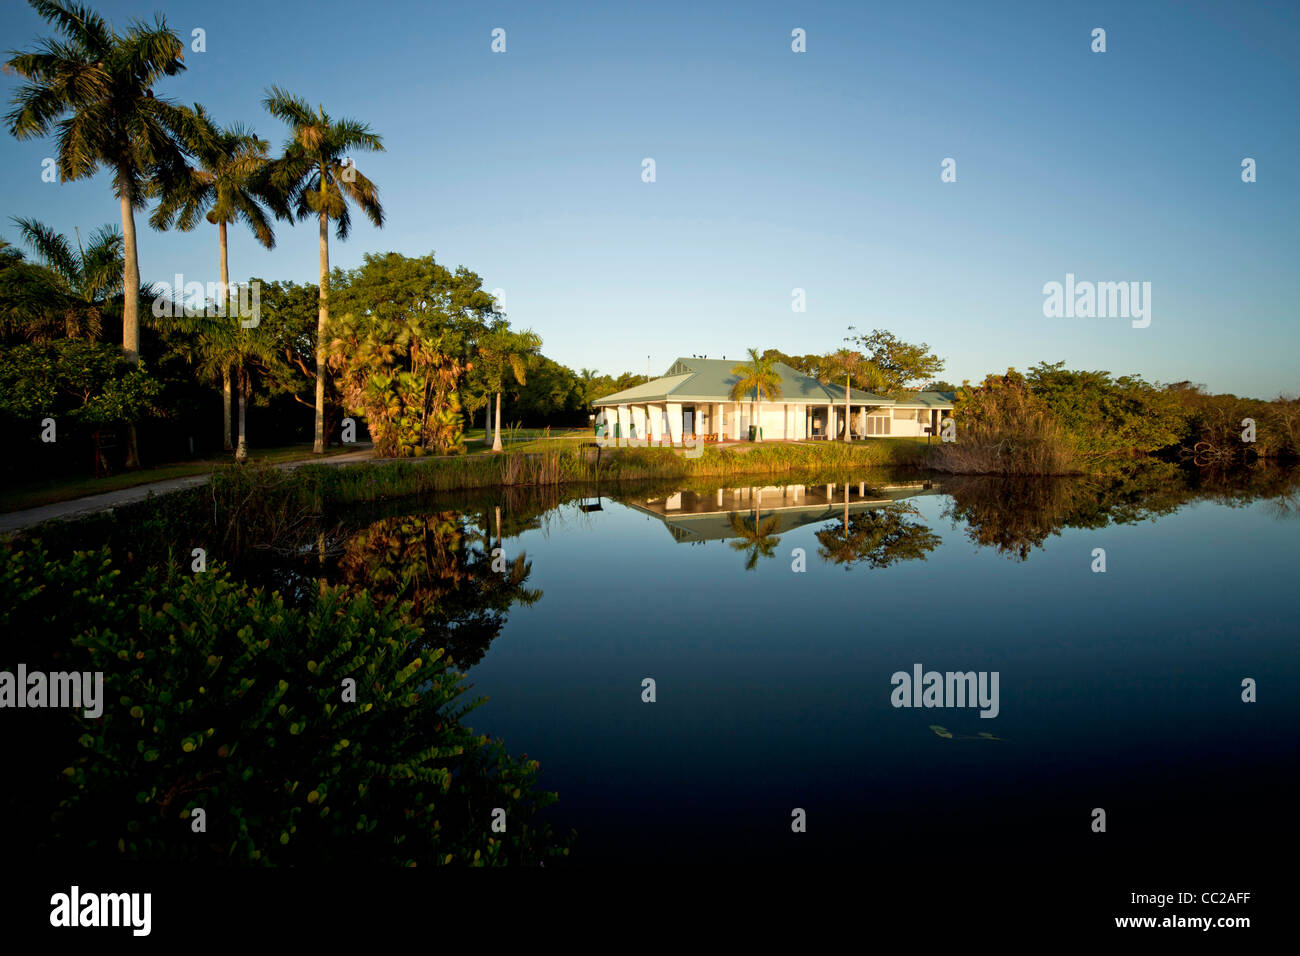 Visitor centre and Lake at Anhinga Trail, Everglades National Park in Florida, USA Stock Photo